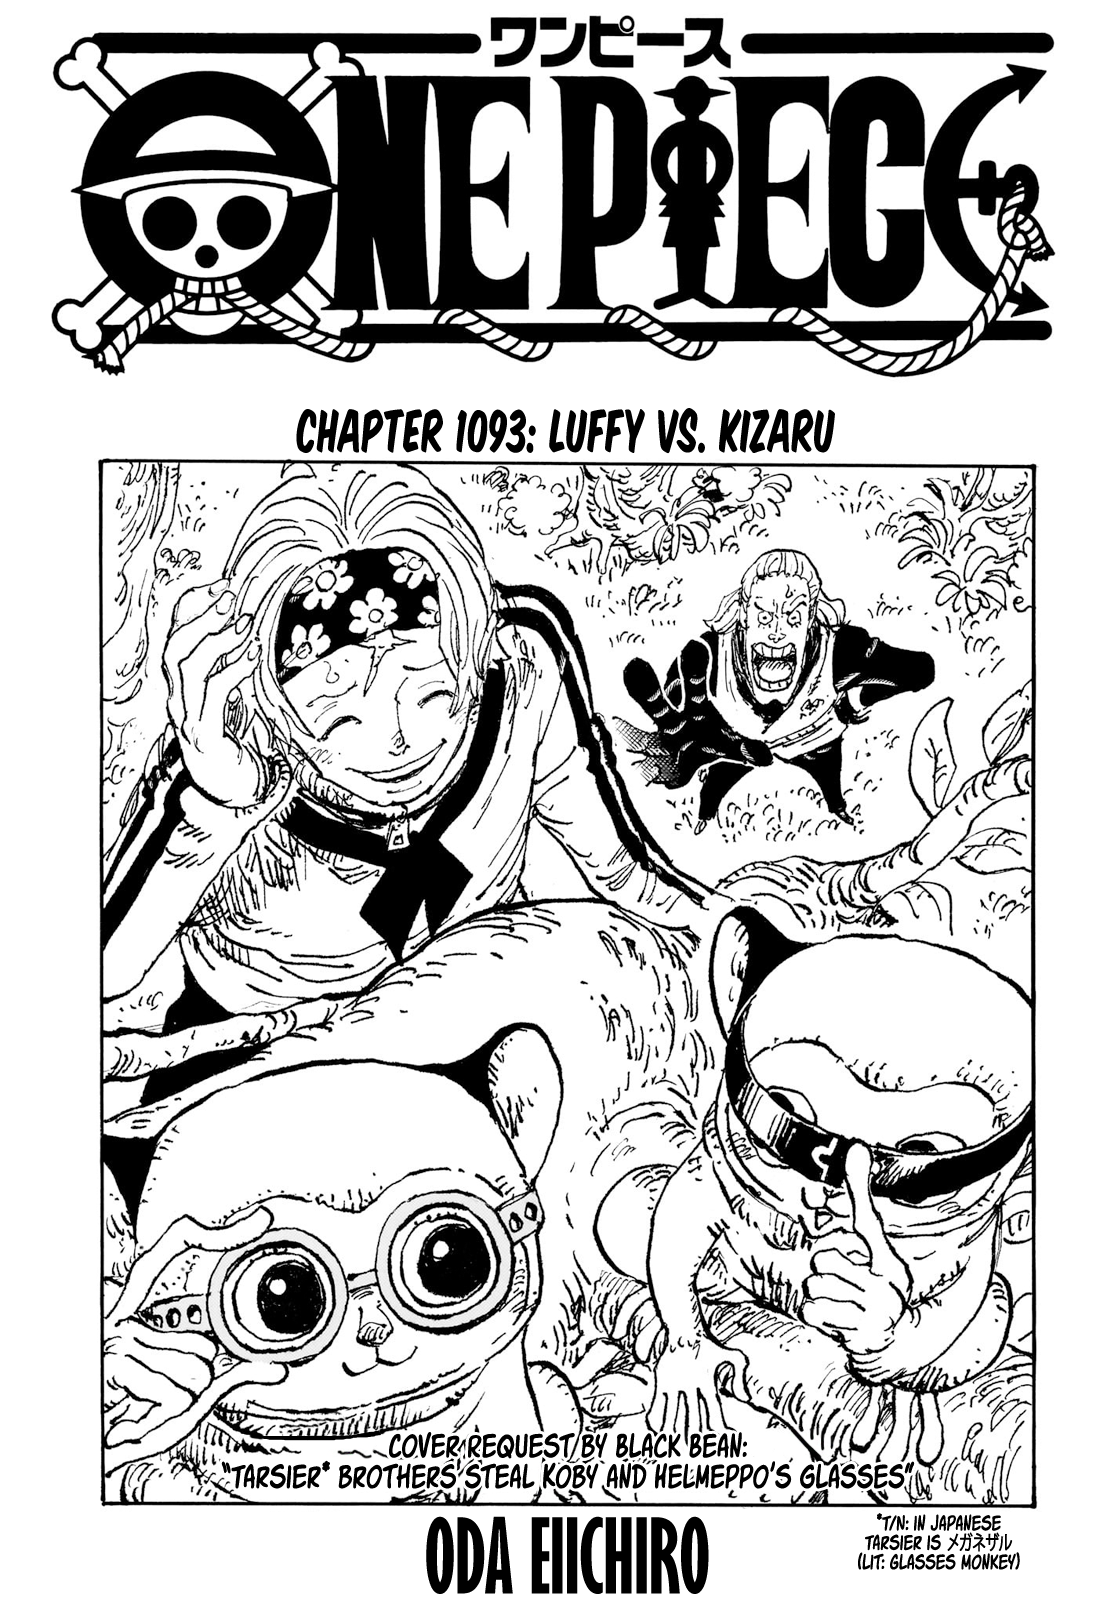 One Piece Chapter 1058 Raw Scan: All new bounties of the Straw Hat crew  revealed!